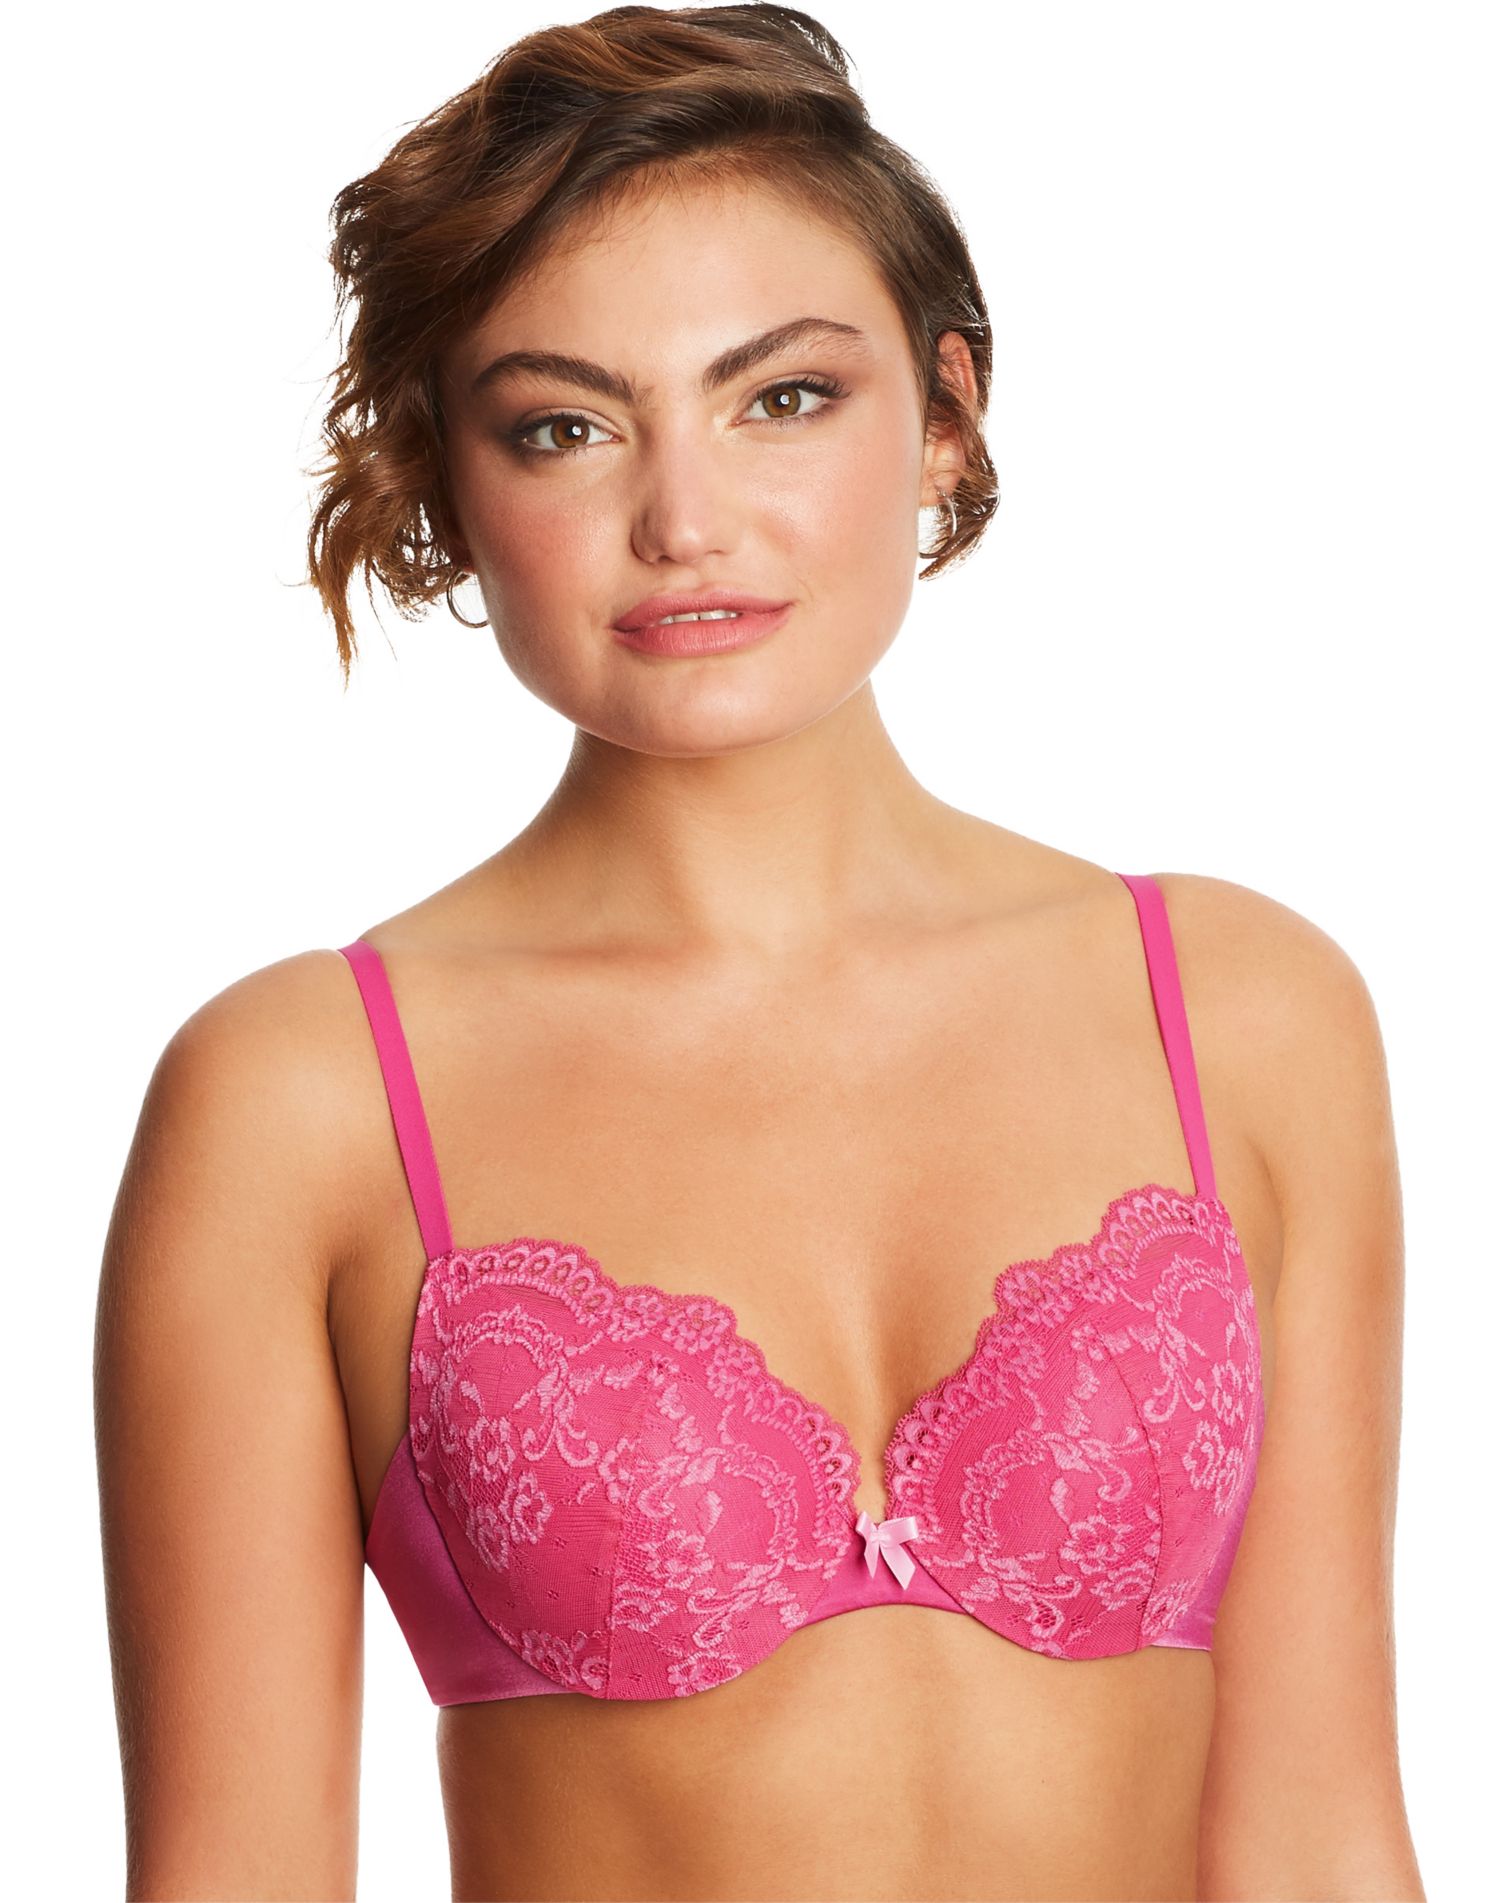 Maidenform Love The Lift Wire-Free Push-Up Bra, 38D, Rose Bloom